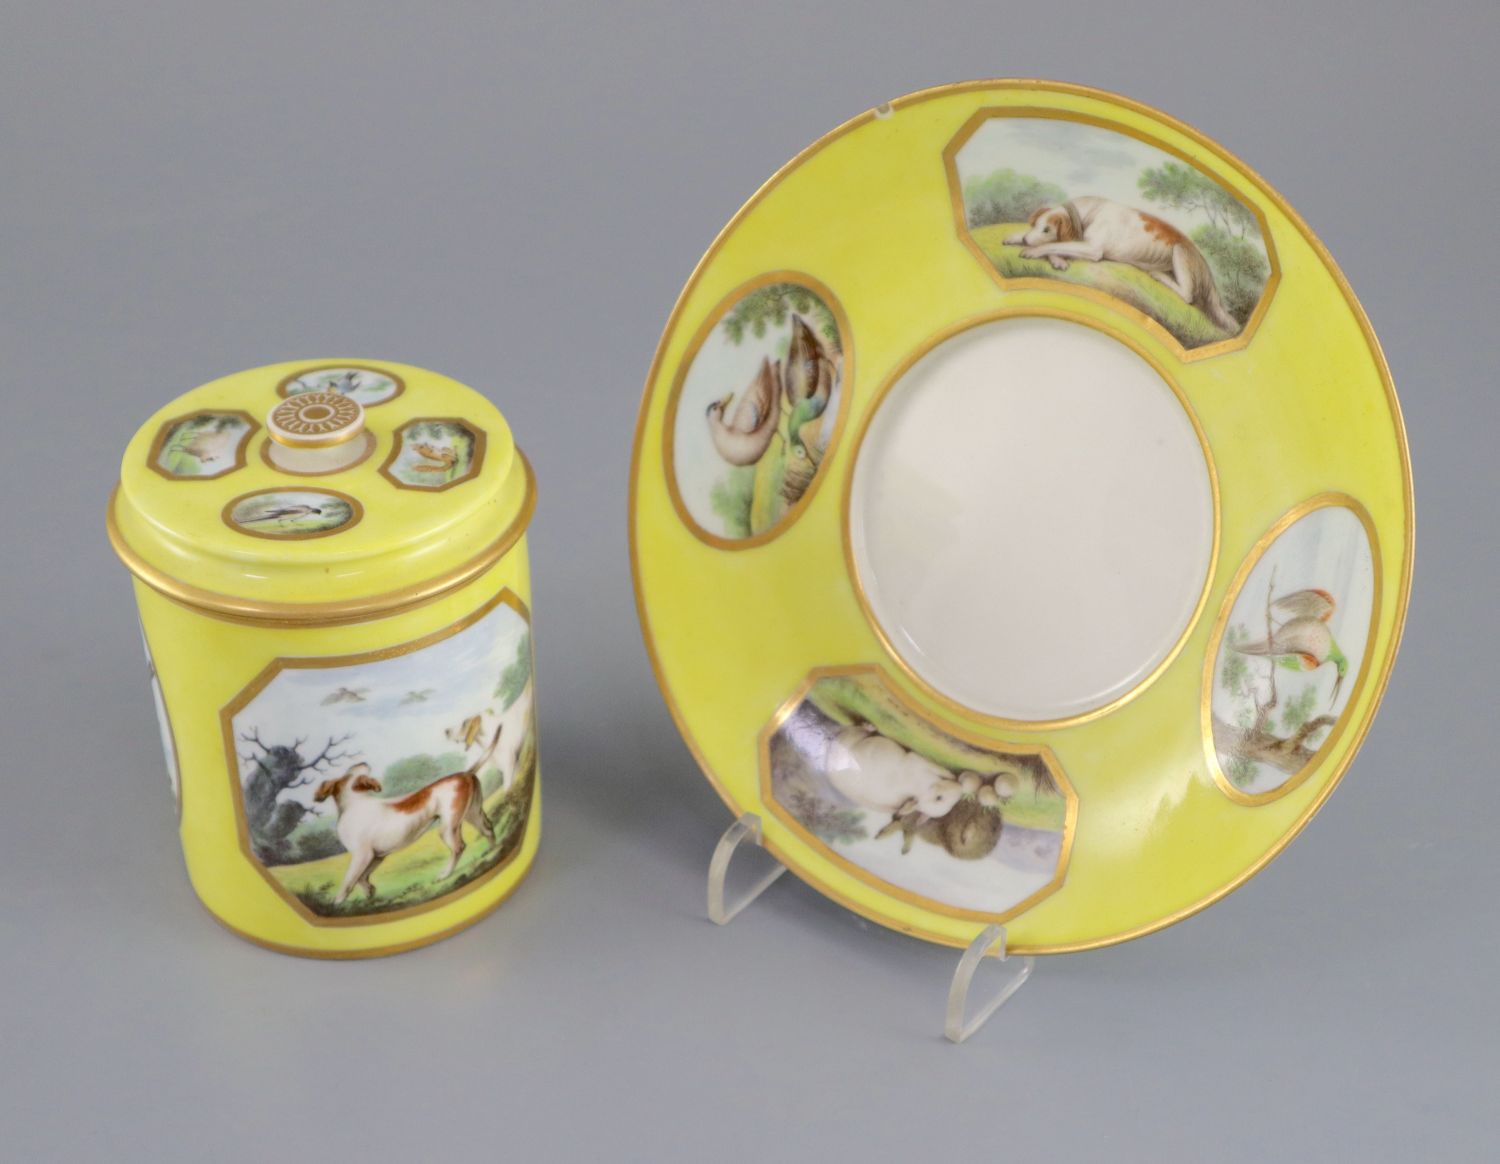 A rare Derby single handled chocolate cup, cover and stand, c.1795-1800, painted in the manner of